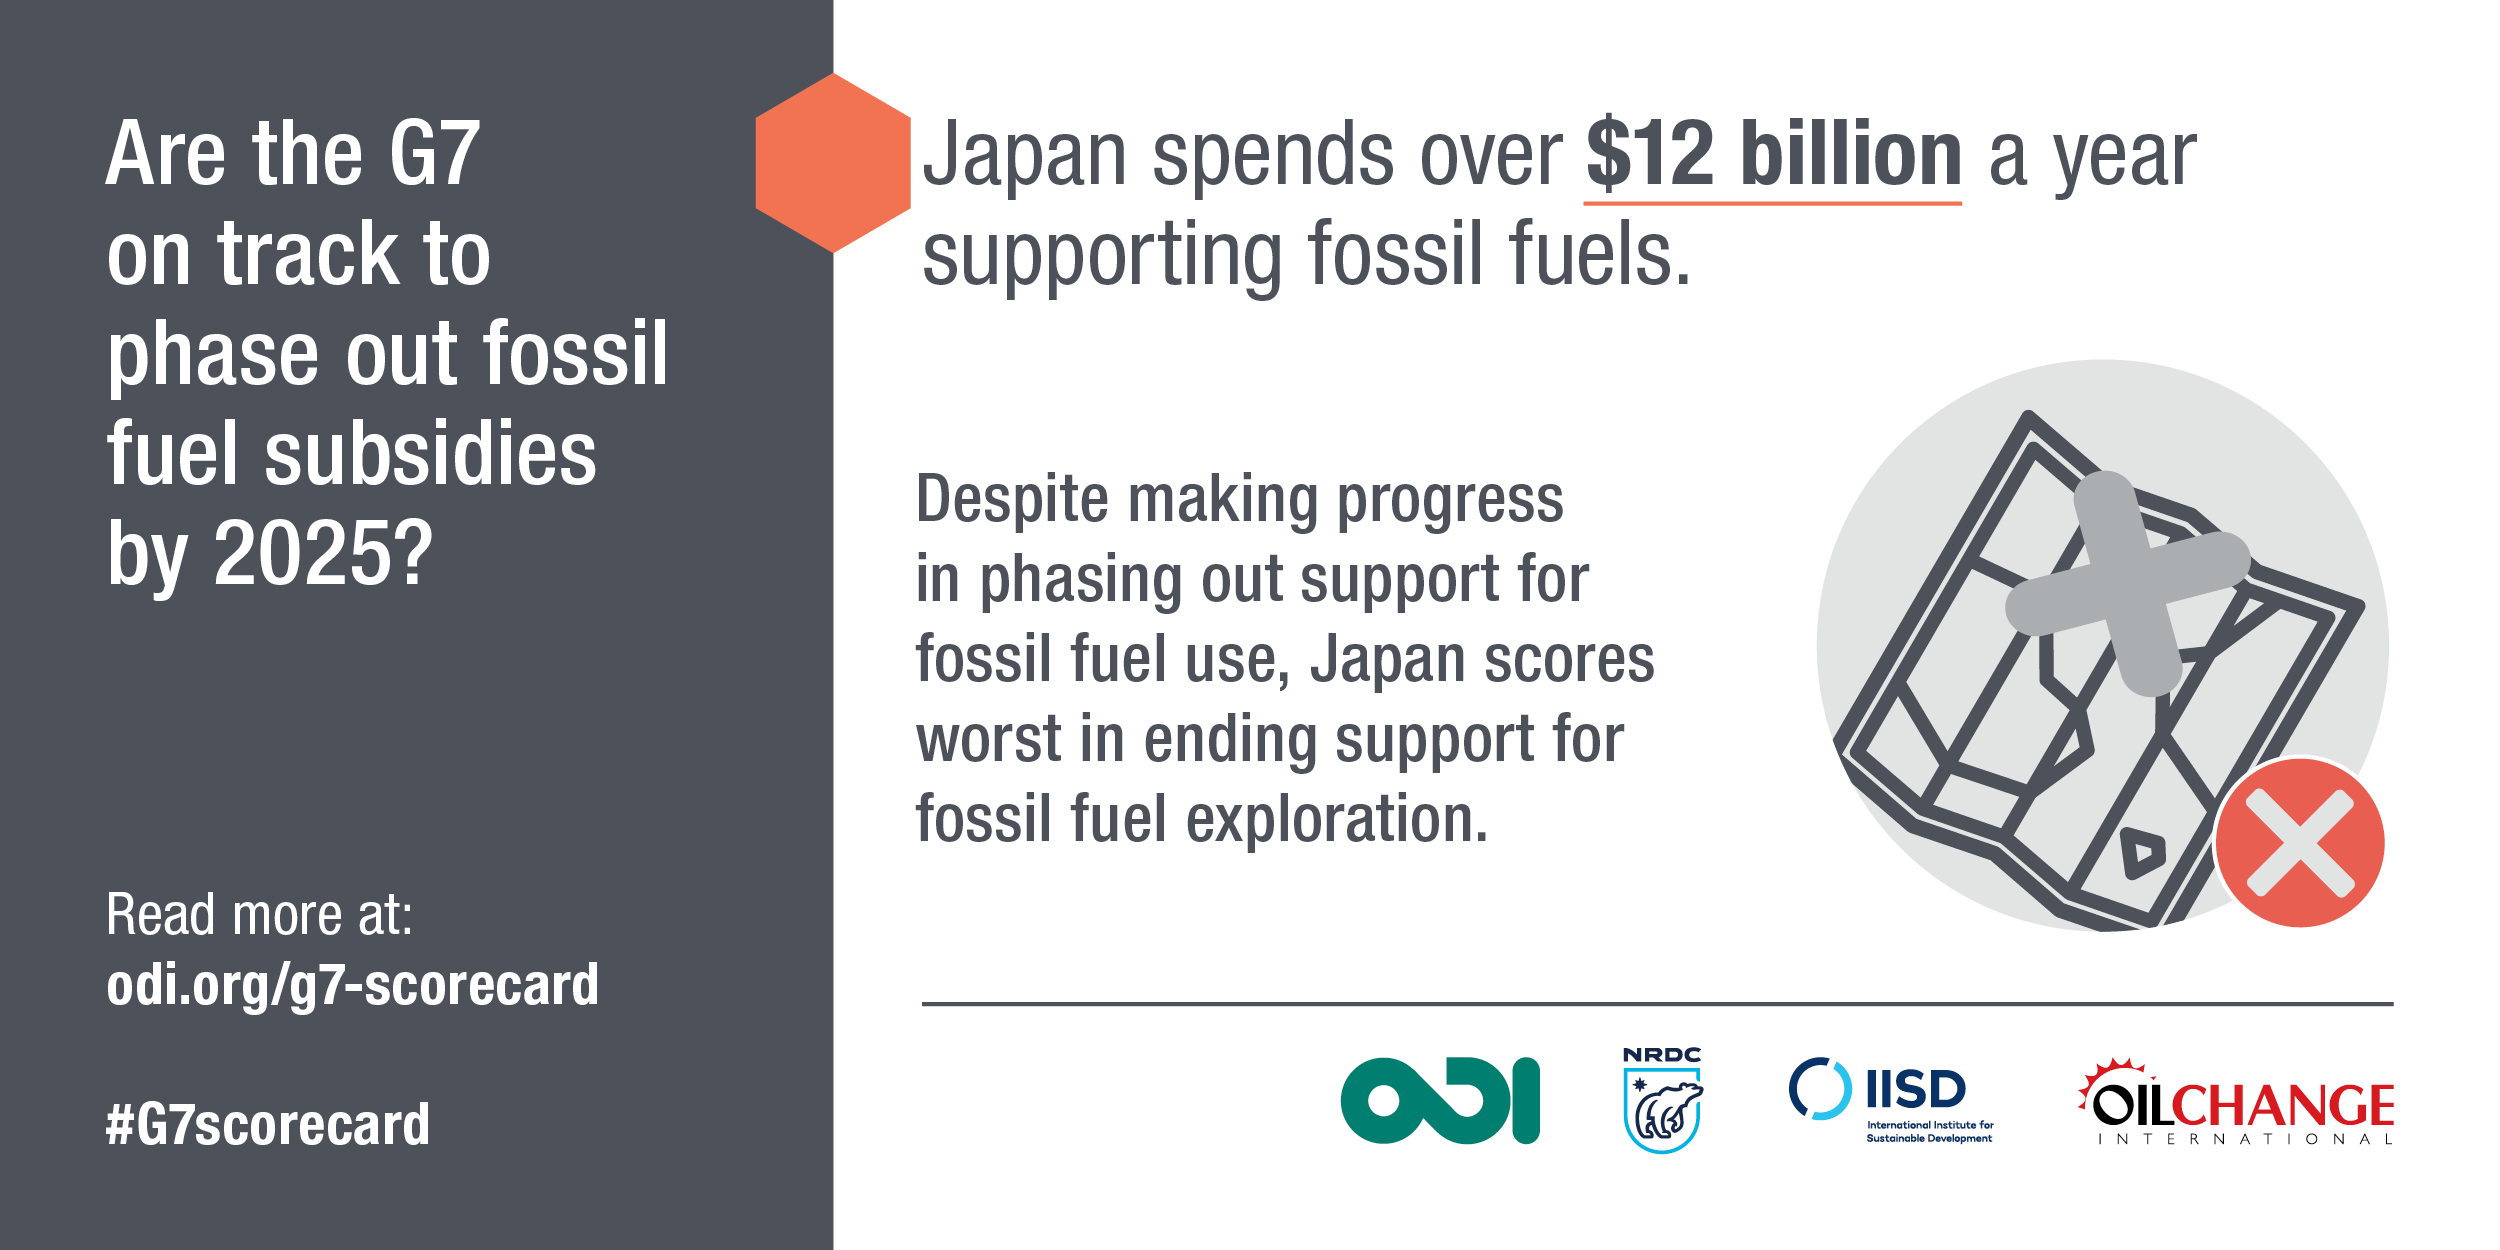 Japan spends over $12 billion a year supporting fossil fuels. Image: ODI